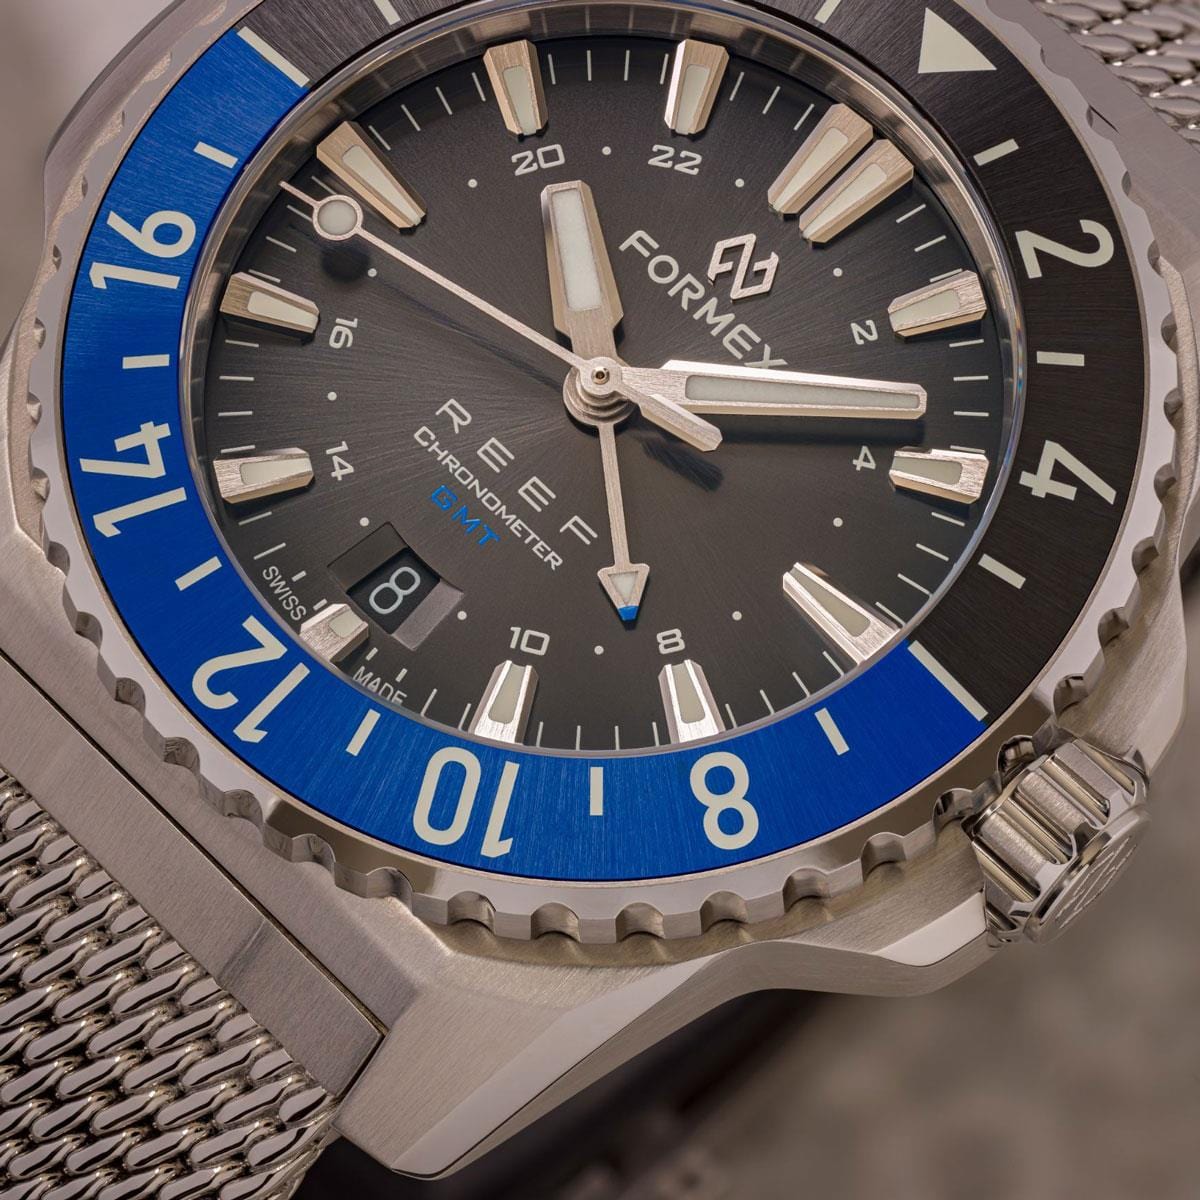 FORMEX REEF GMT - Black Dial with Blue GMT - Stainless Steel Bracelet